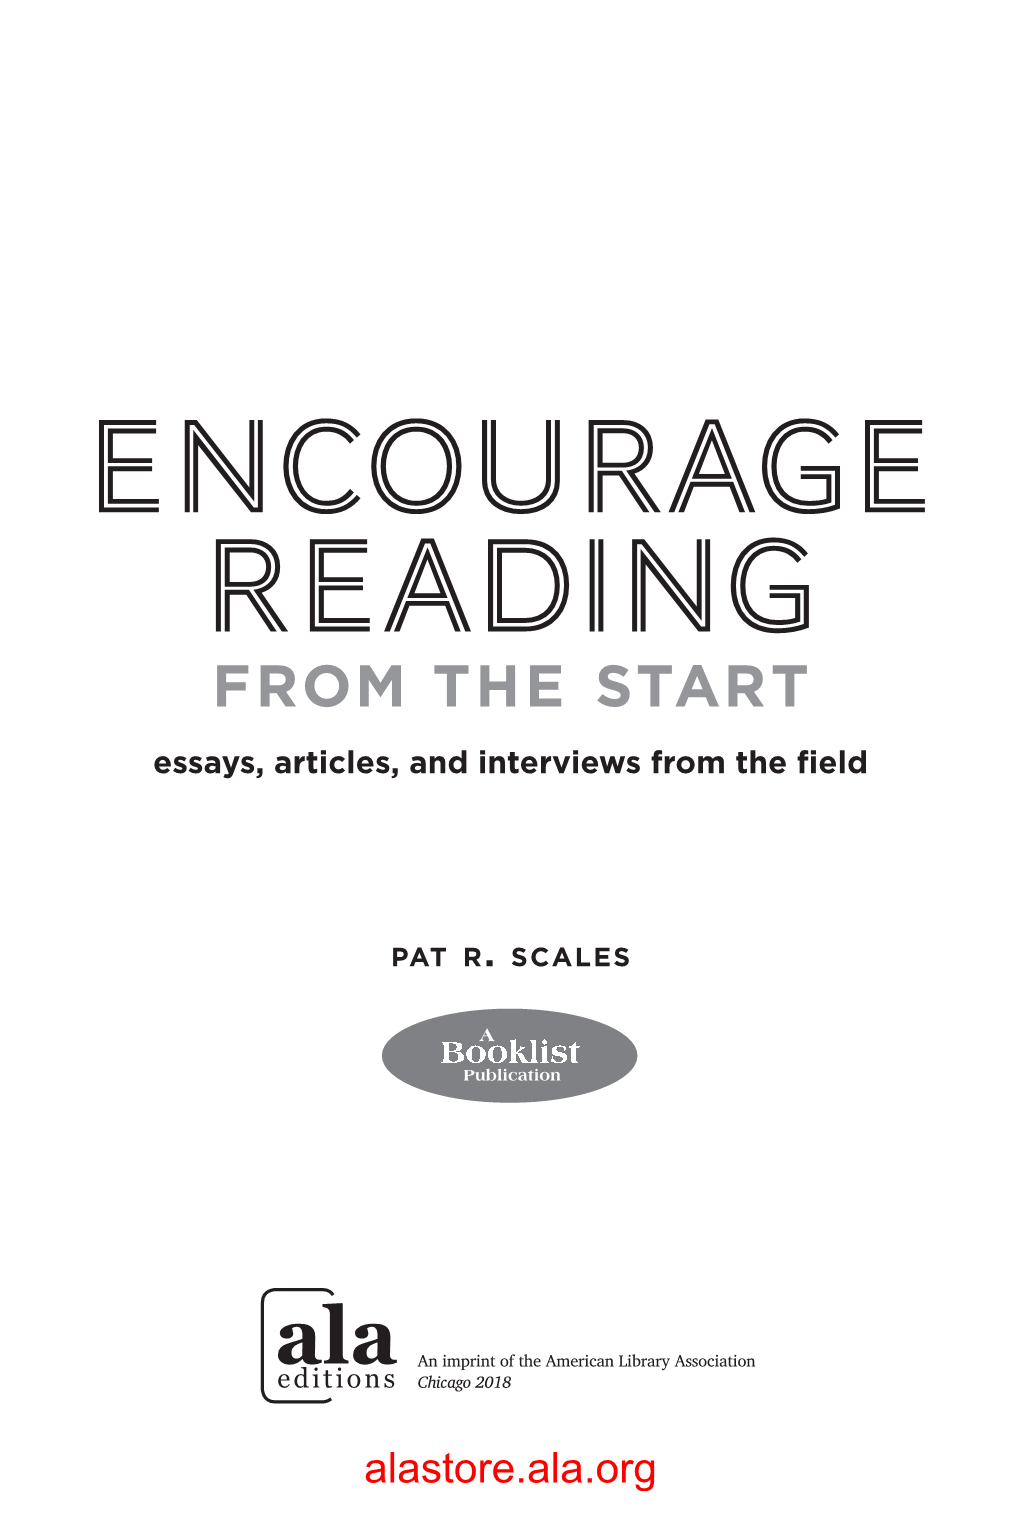 Encourage Reading ALA Editions Purchases Fund Advocacy, Awareness, and Accreditation Programs for Library Professionals Worldwide